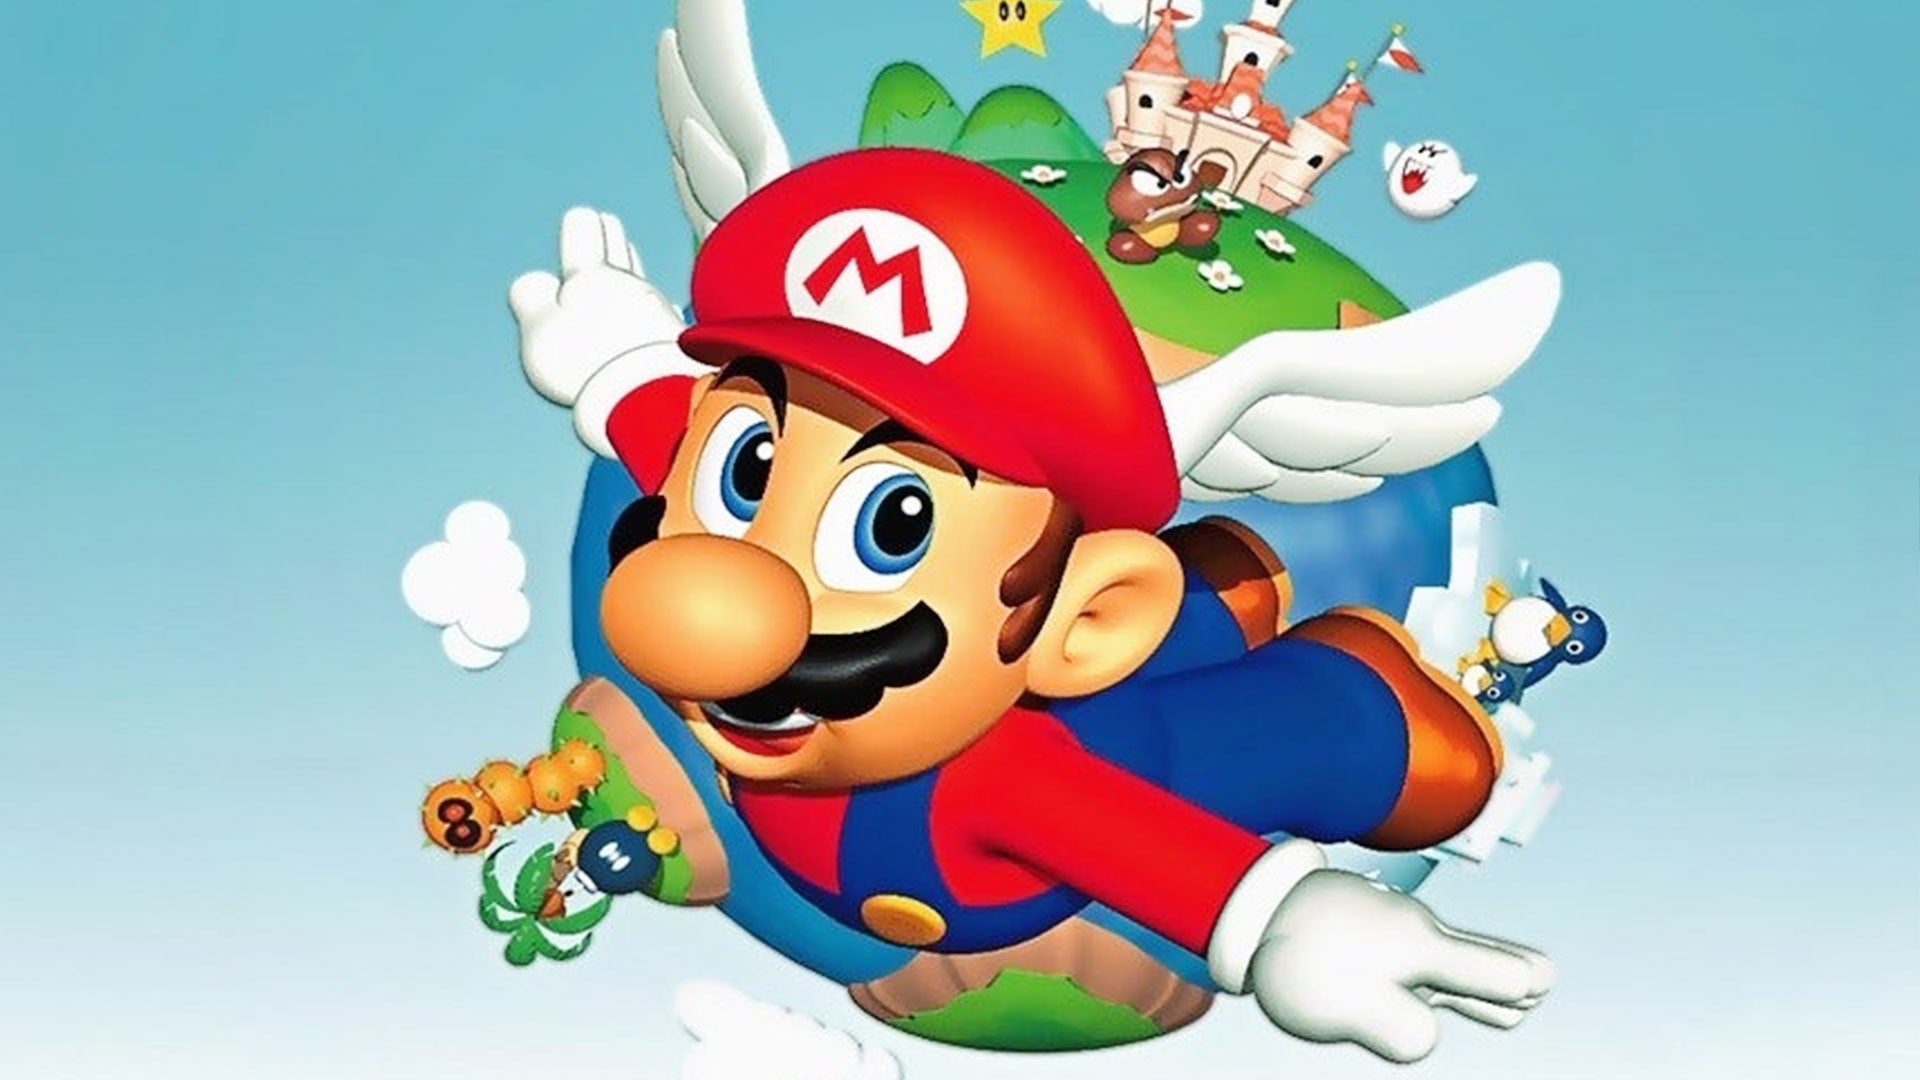 A Sealed Copy of Vast Mario 64 Sells for $1.5 Million, Becomes Most Indispensable Game Collectible Ever